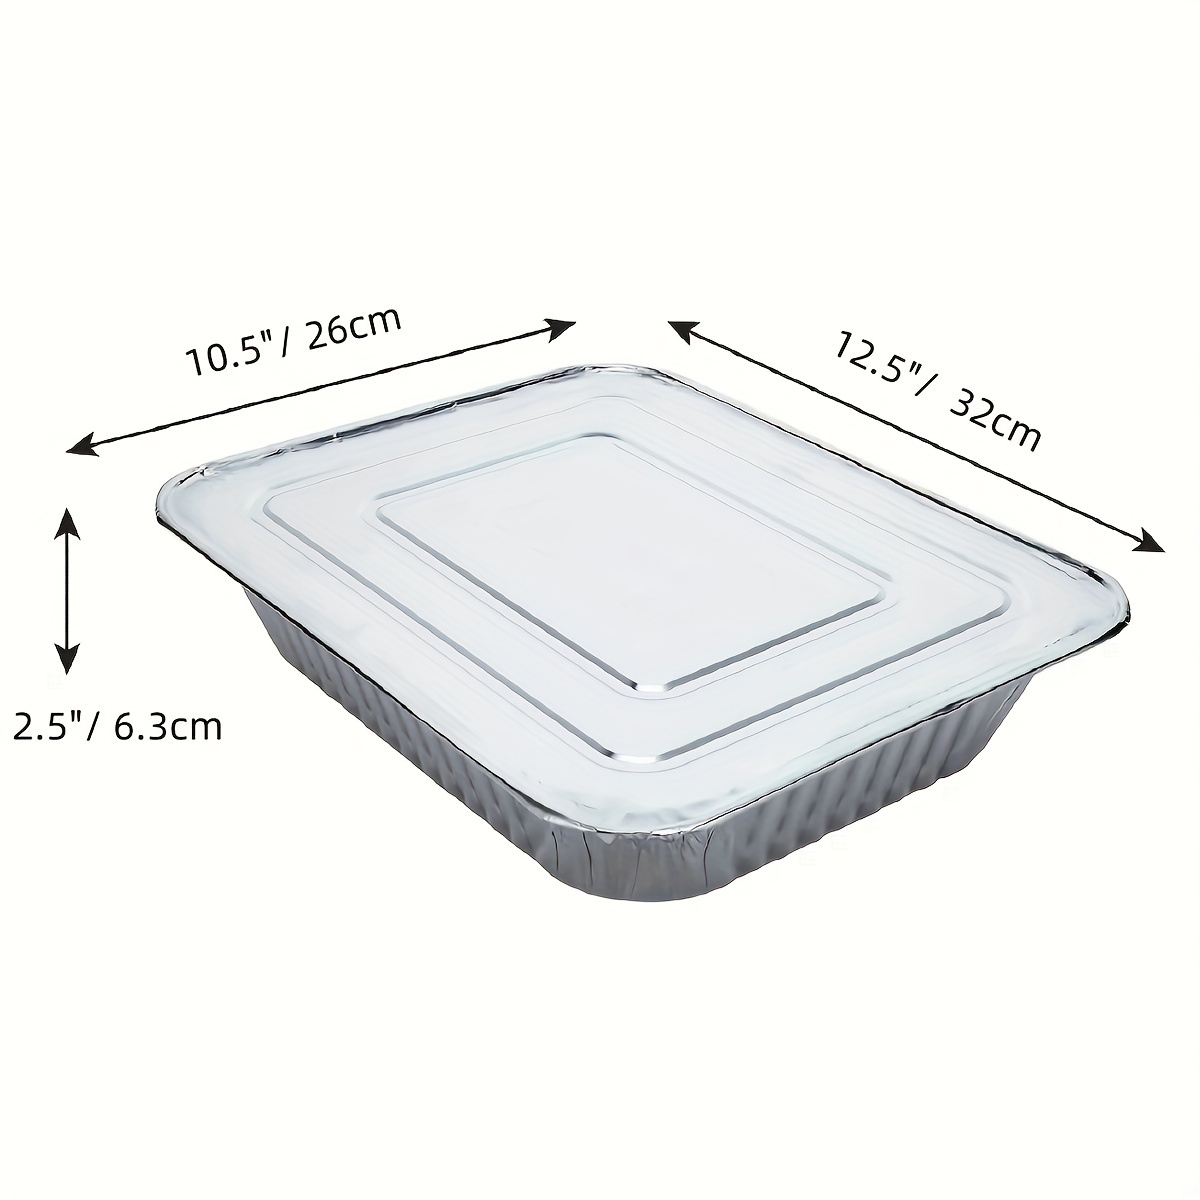 8pcs Foil Pans With Aluminum Lids Aluminum Pans With Sealing Cover For Safe  Heating As Food Containers Great For Baking, Cooking, Heating, Prepping F